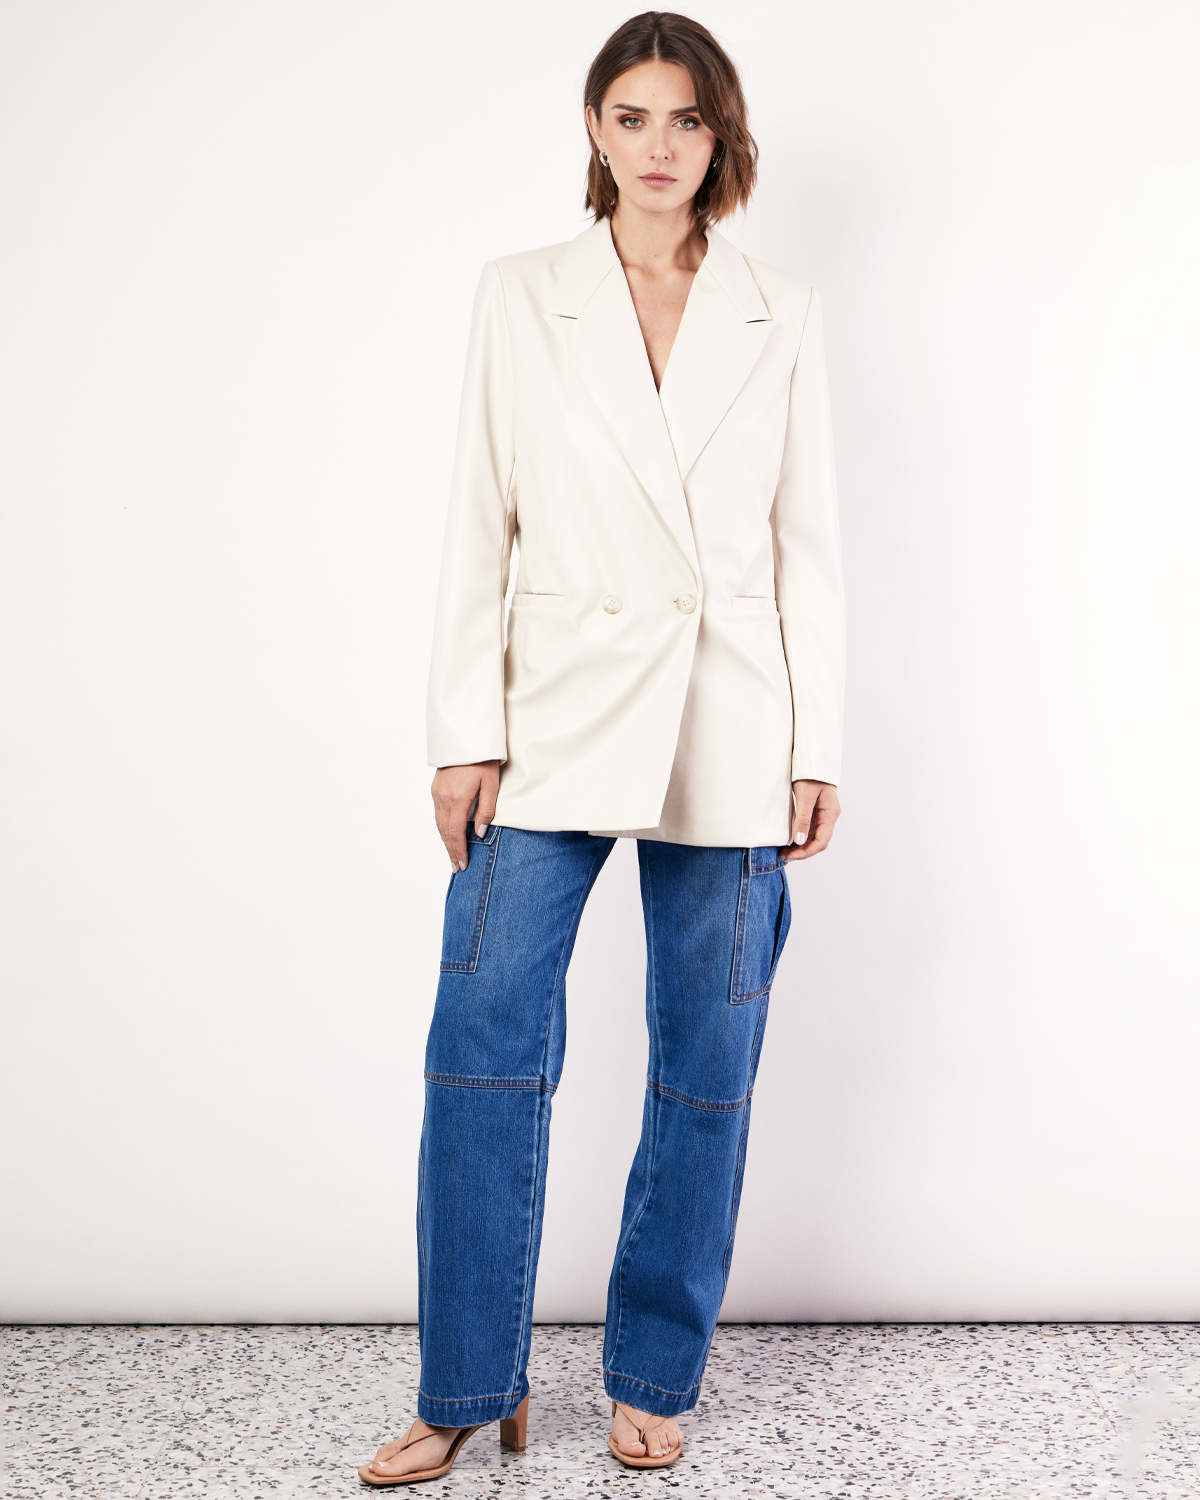 The Vegan Leather Boxy Blazer is a relaxed, oversized silhouette, featuring front pockets and a button closure. It is fully lined and is crafted from a buttery soft Vegan leather fabrication in Cream. Now available at Romy. 